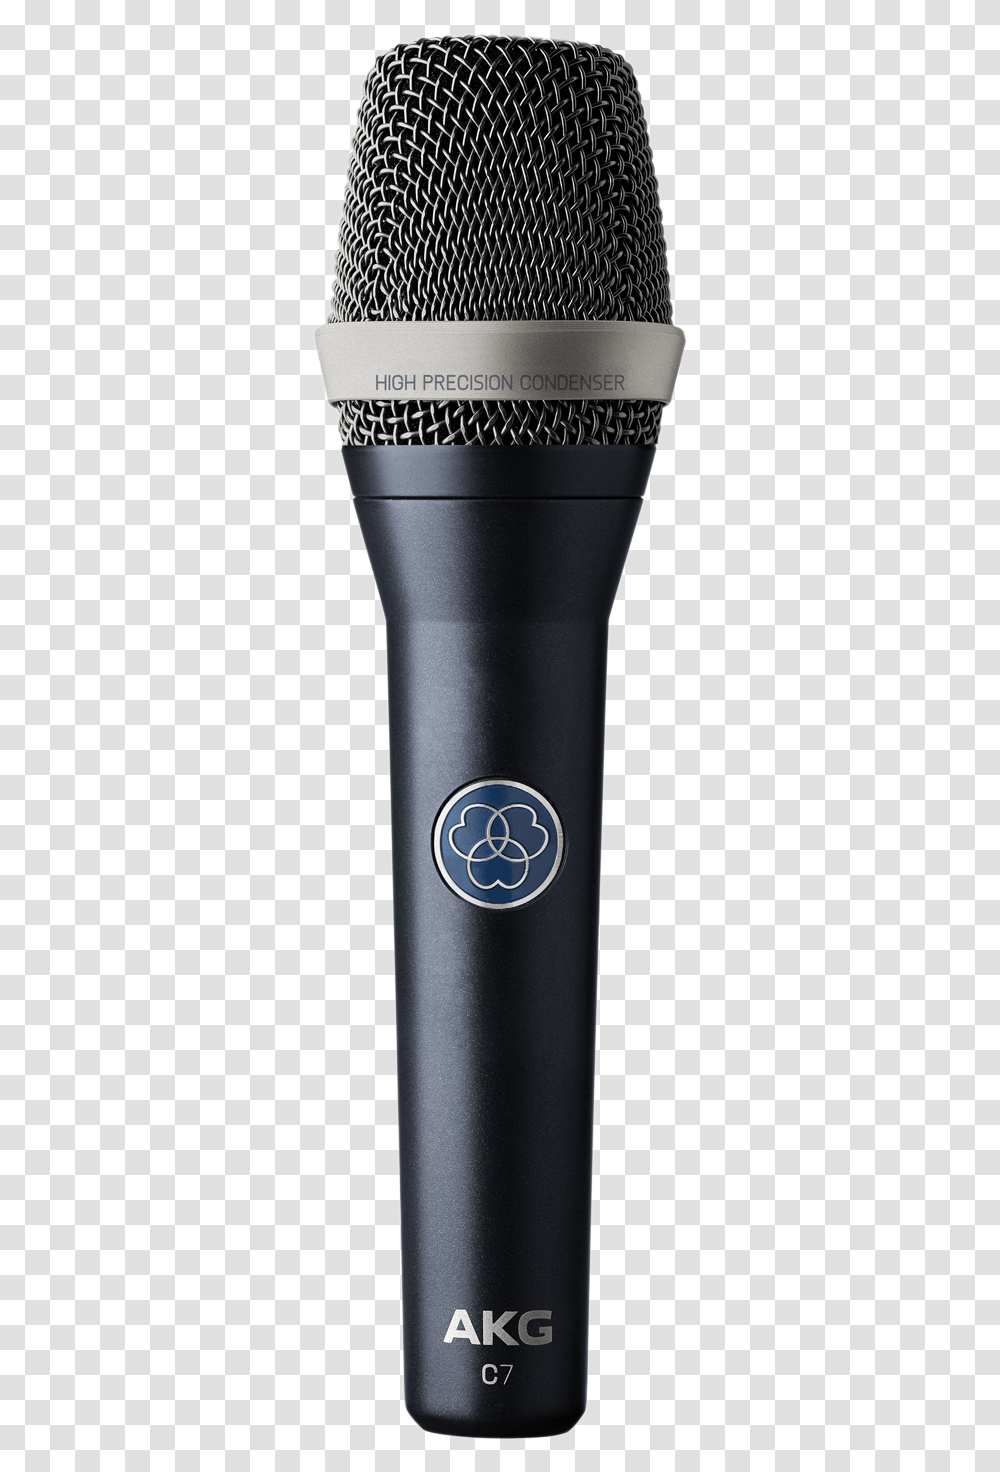 Akg, Bottle, Steel, Microphone, Electrical Device Transparent Png